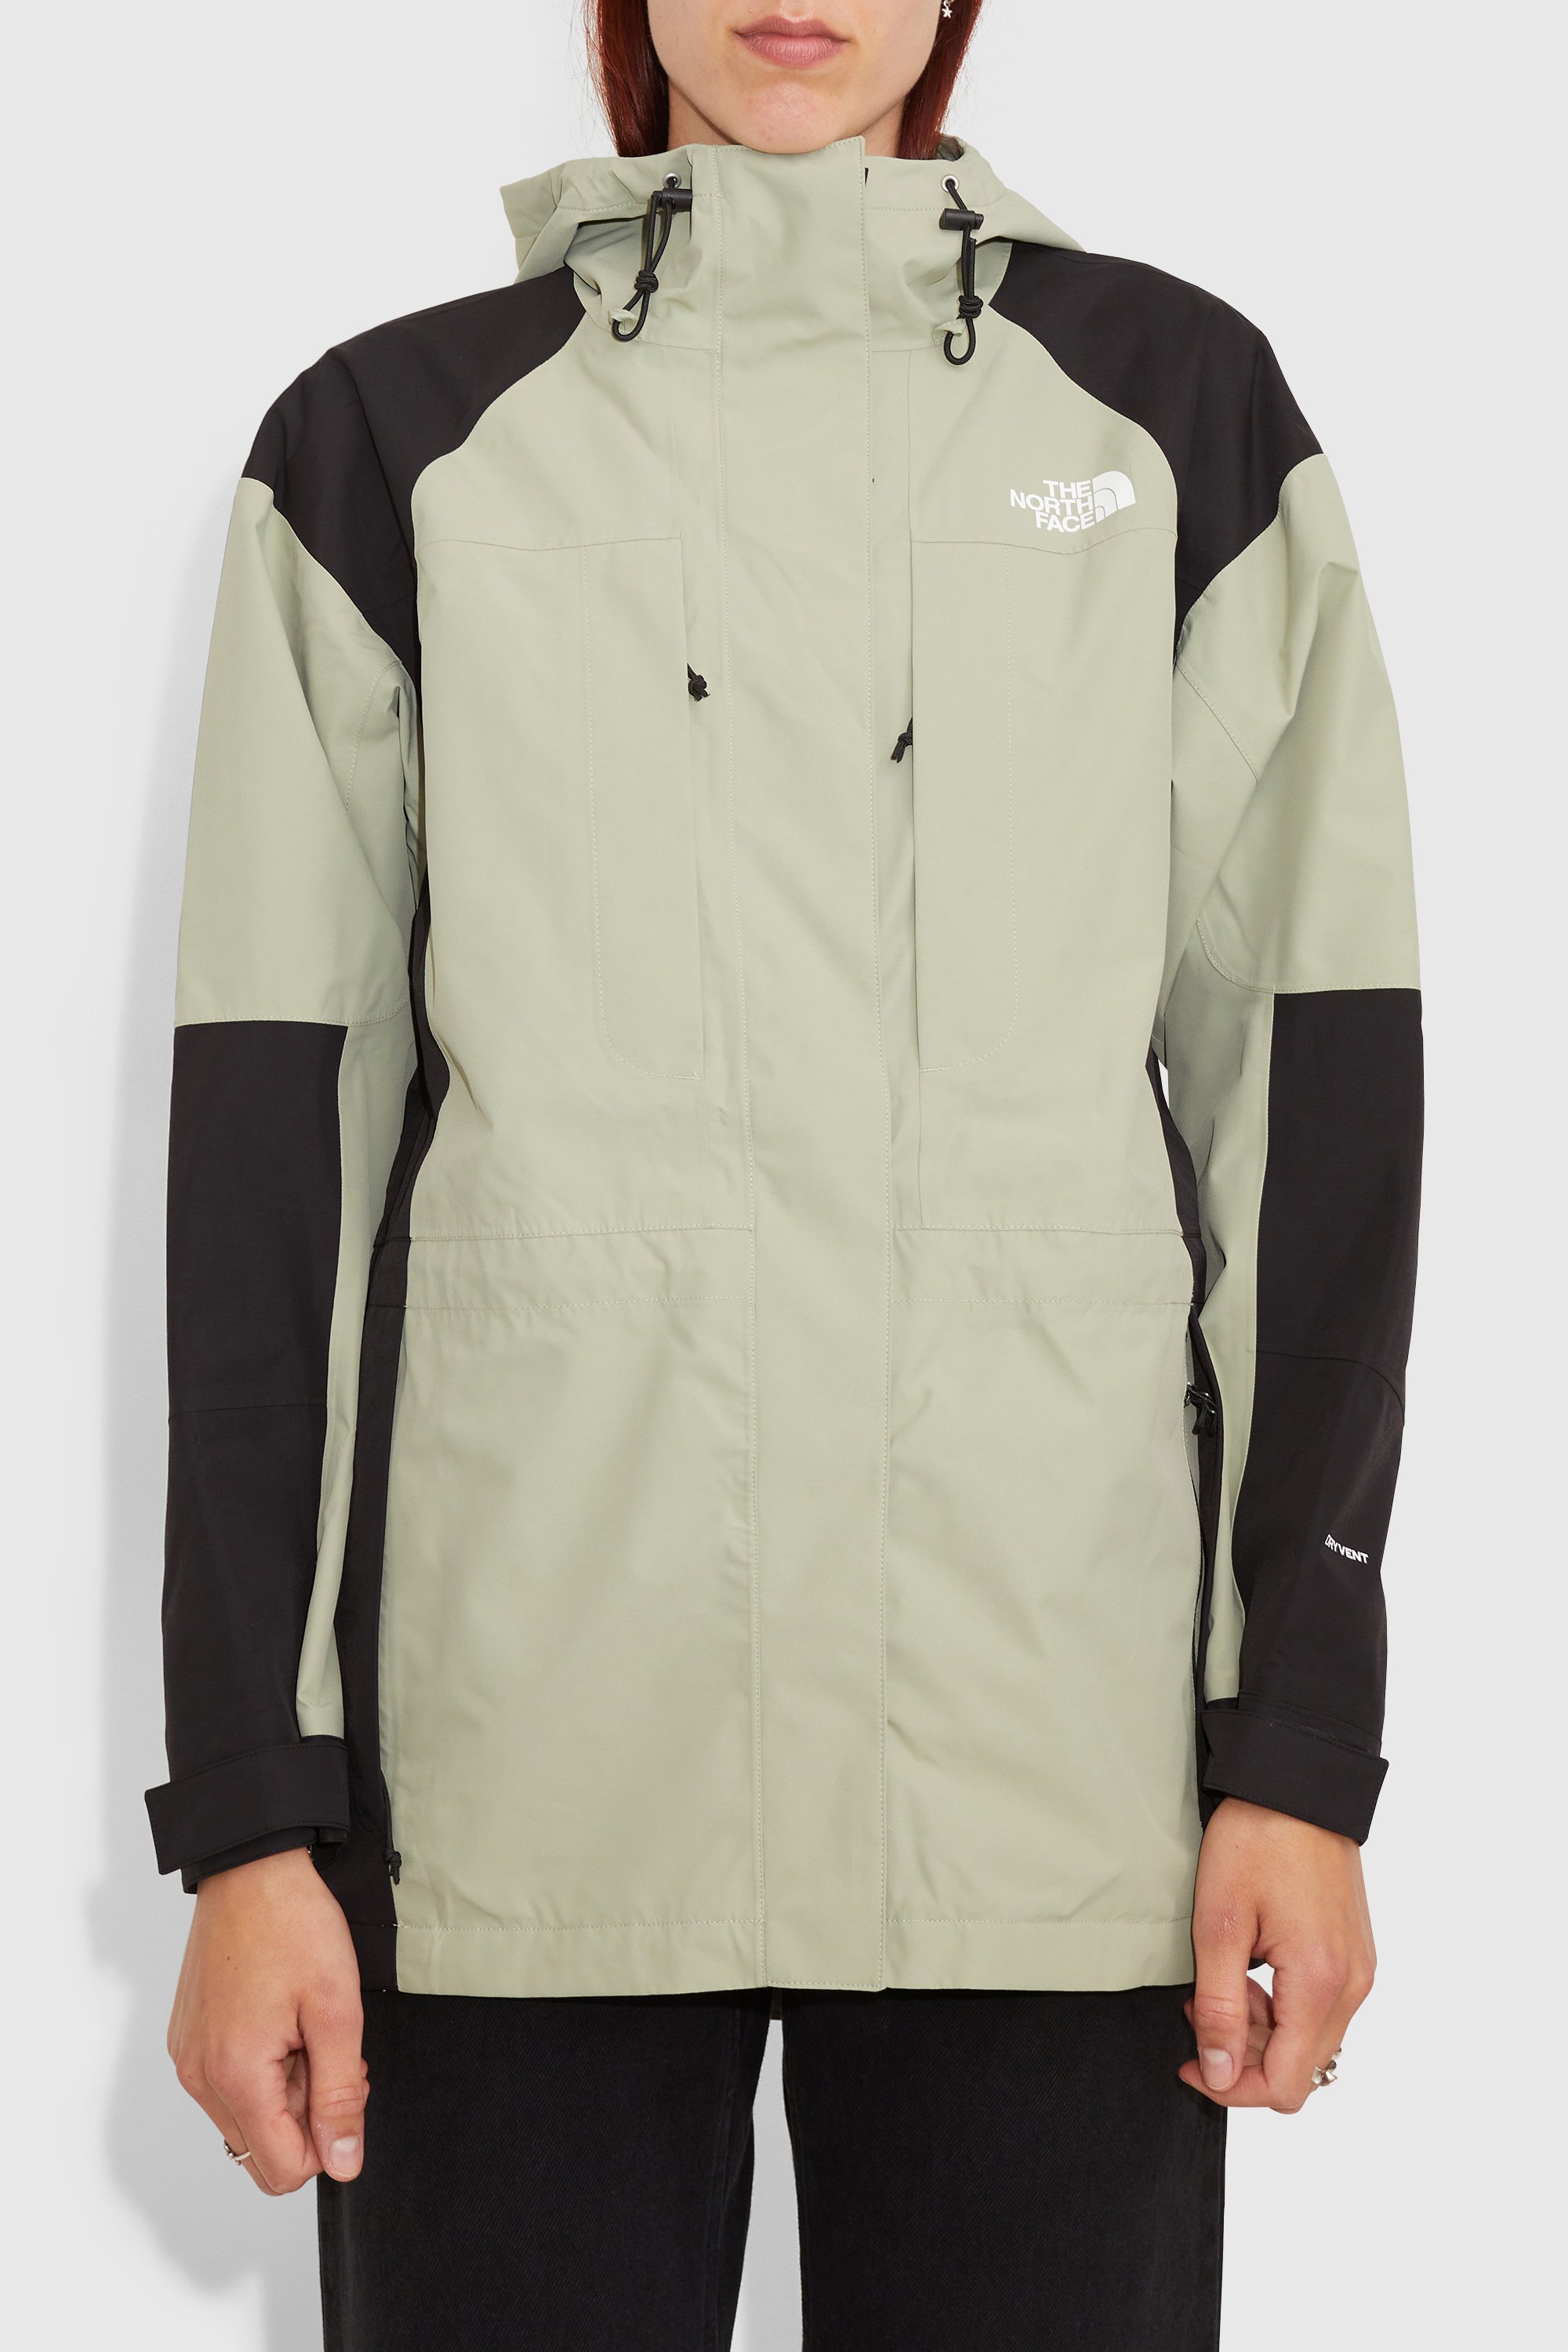 THE NORTH FACE MOUNTAIN JACKET WOODCAMO